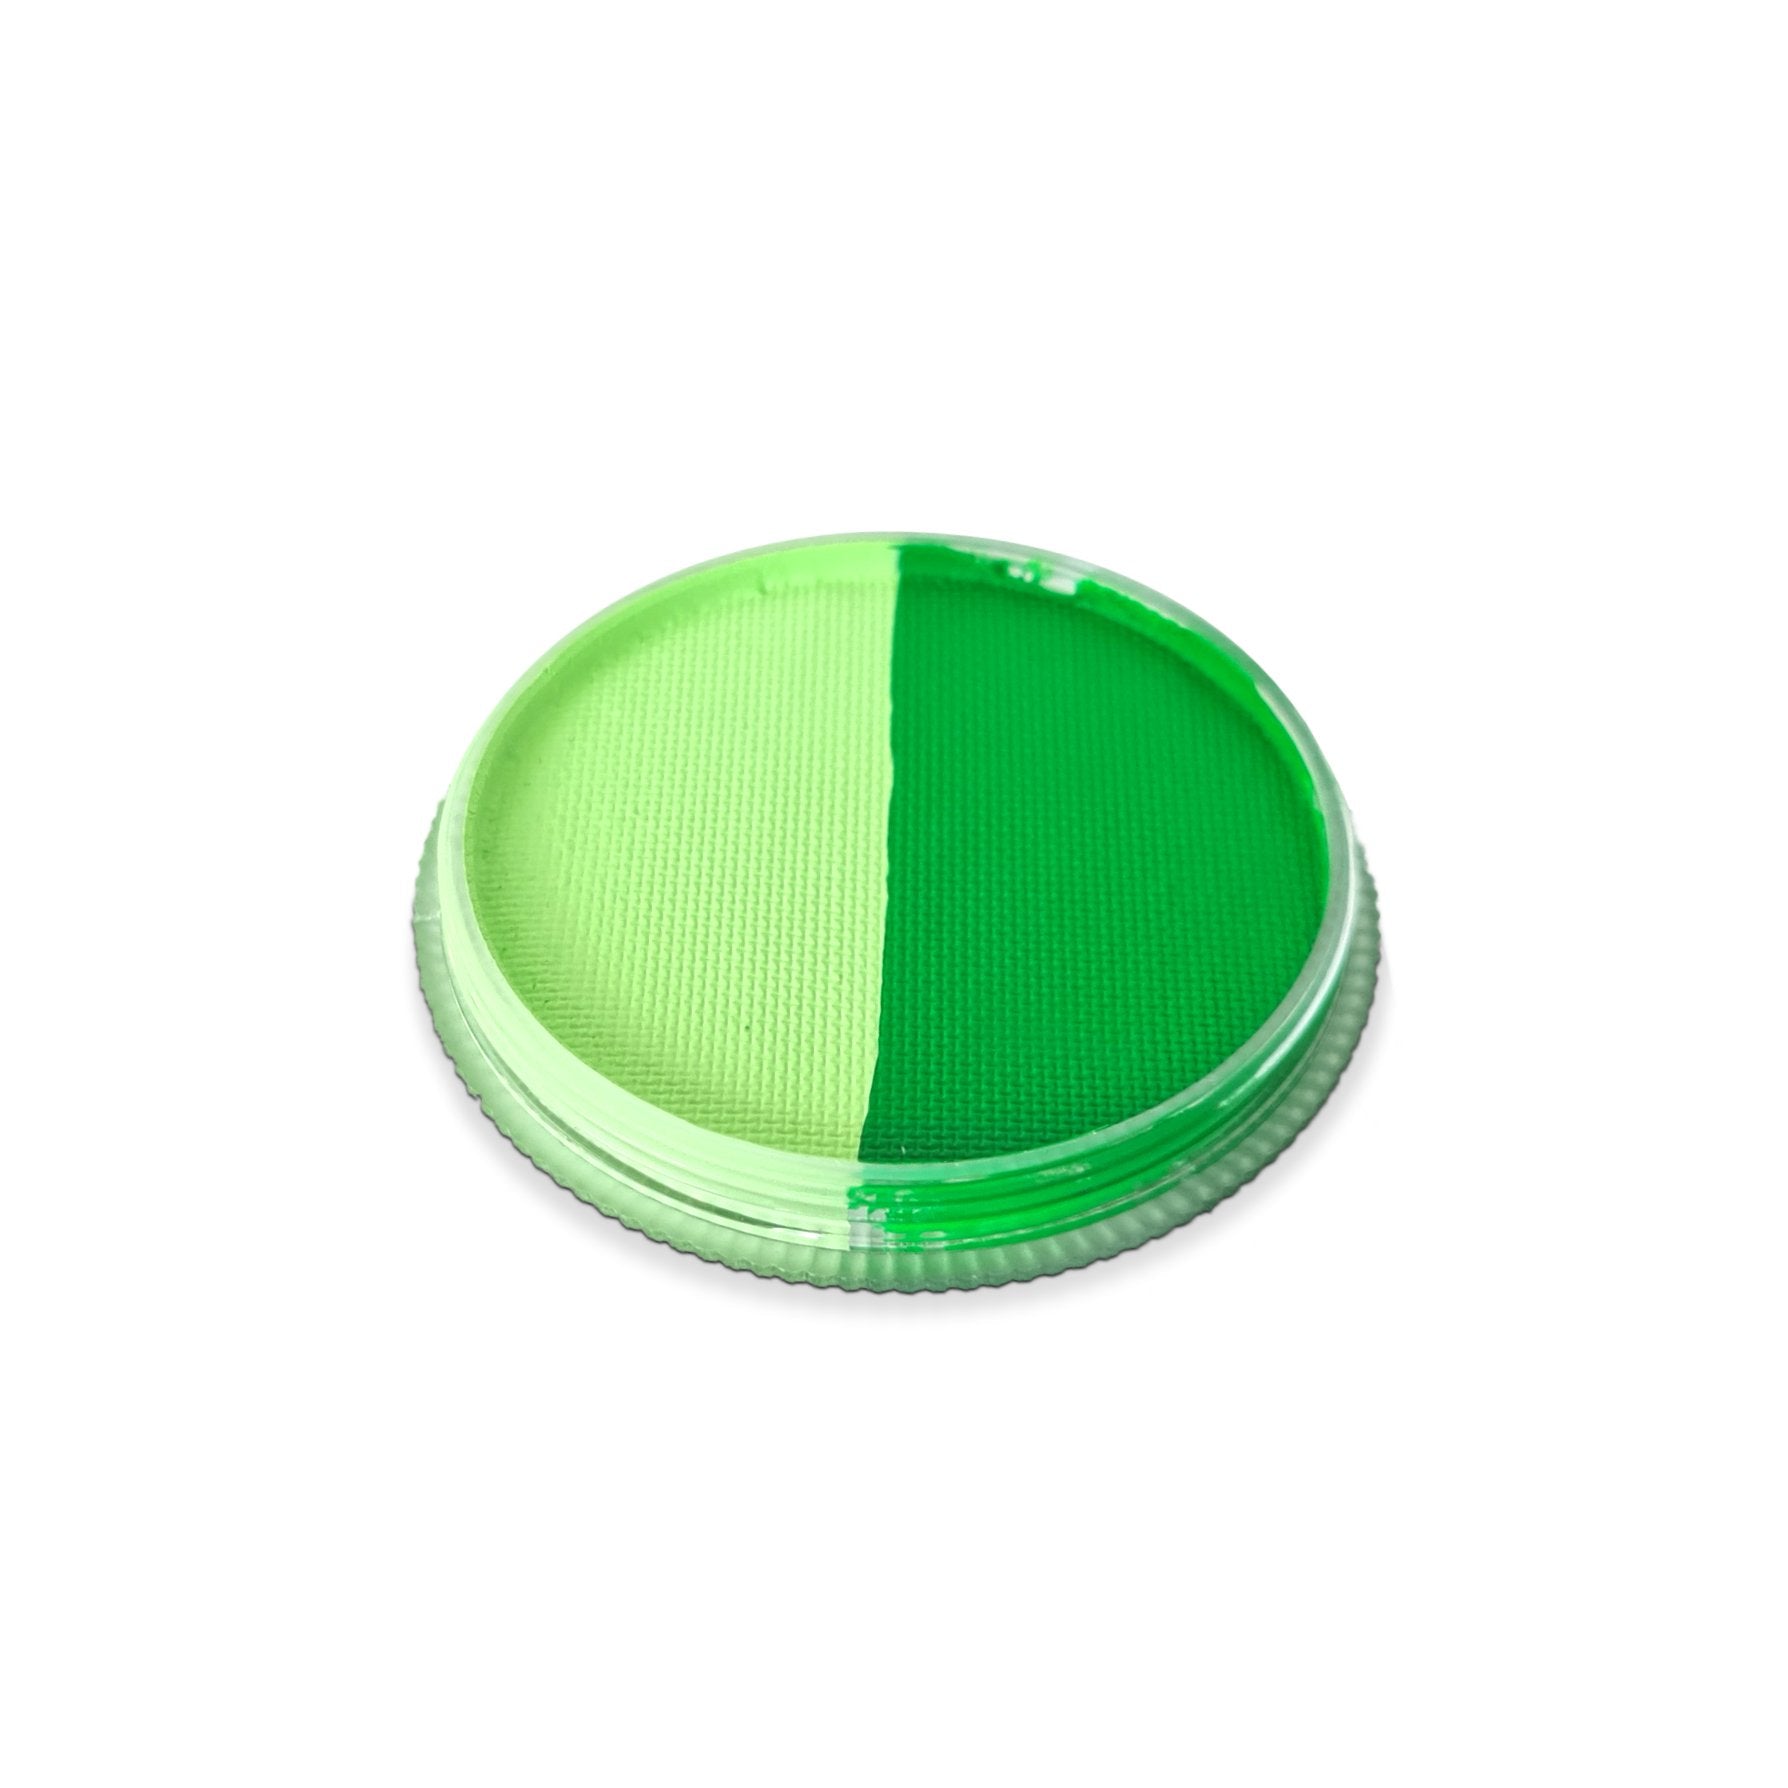 DUO FACE PAINT - NEON GREEN / PASTEL GREEN